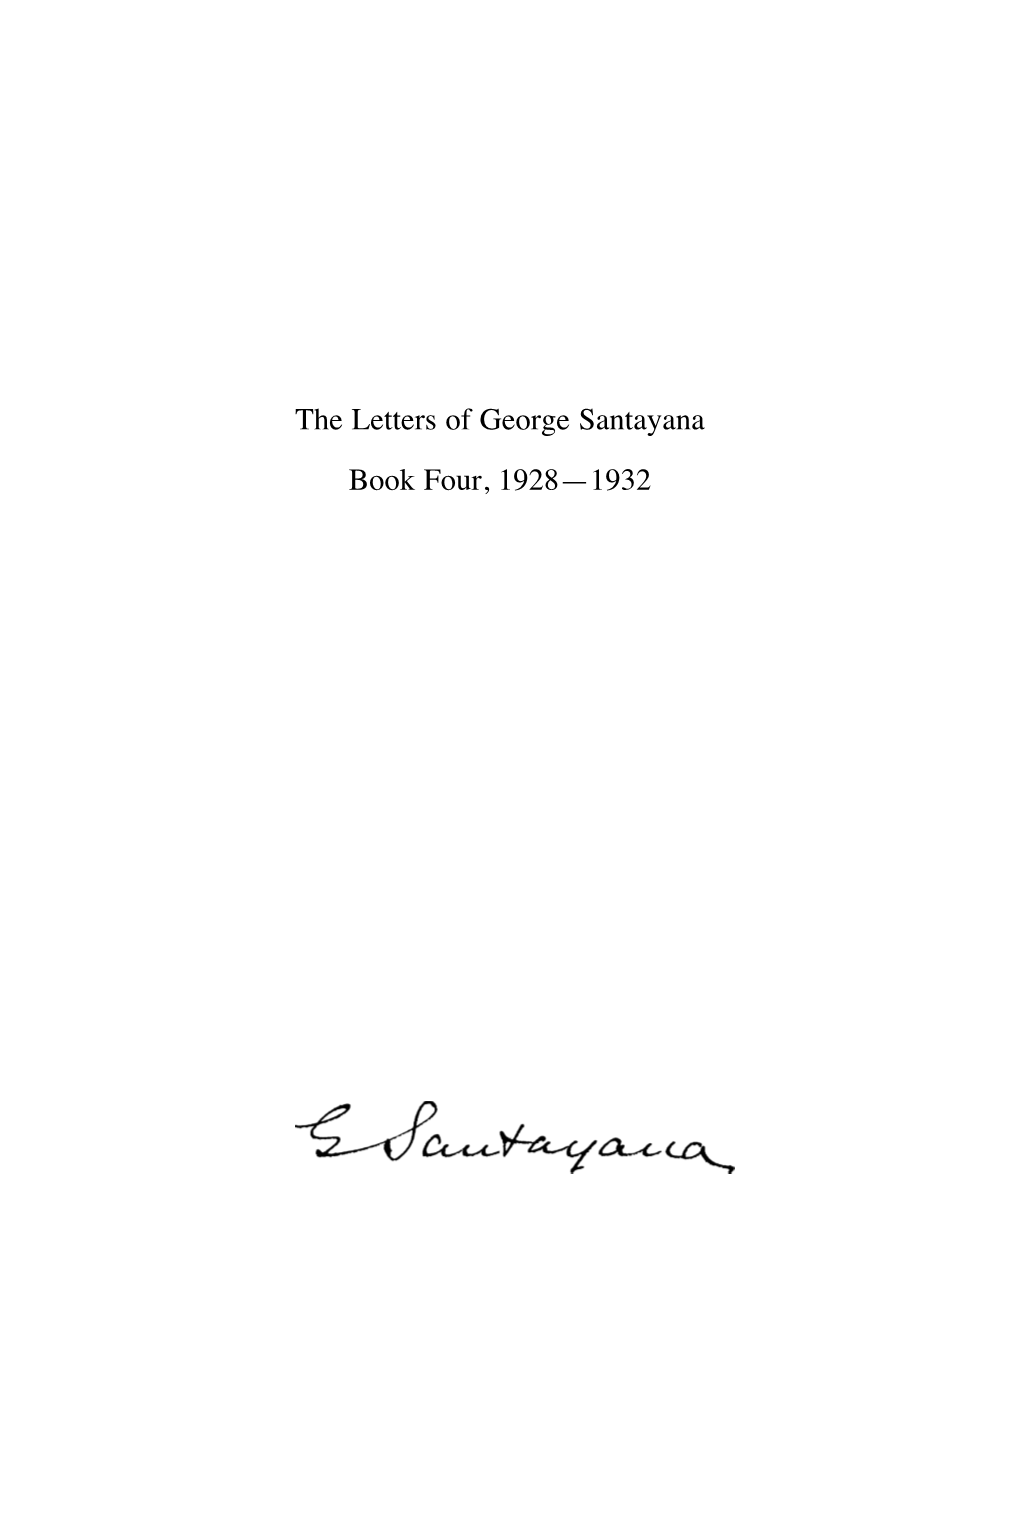 The Letters of George Santayana Book Four, 1928—1932 the Works of George Santayana Volume V 1928–1932 4:3